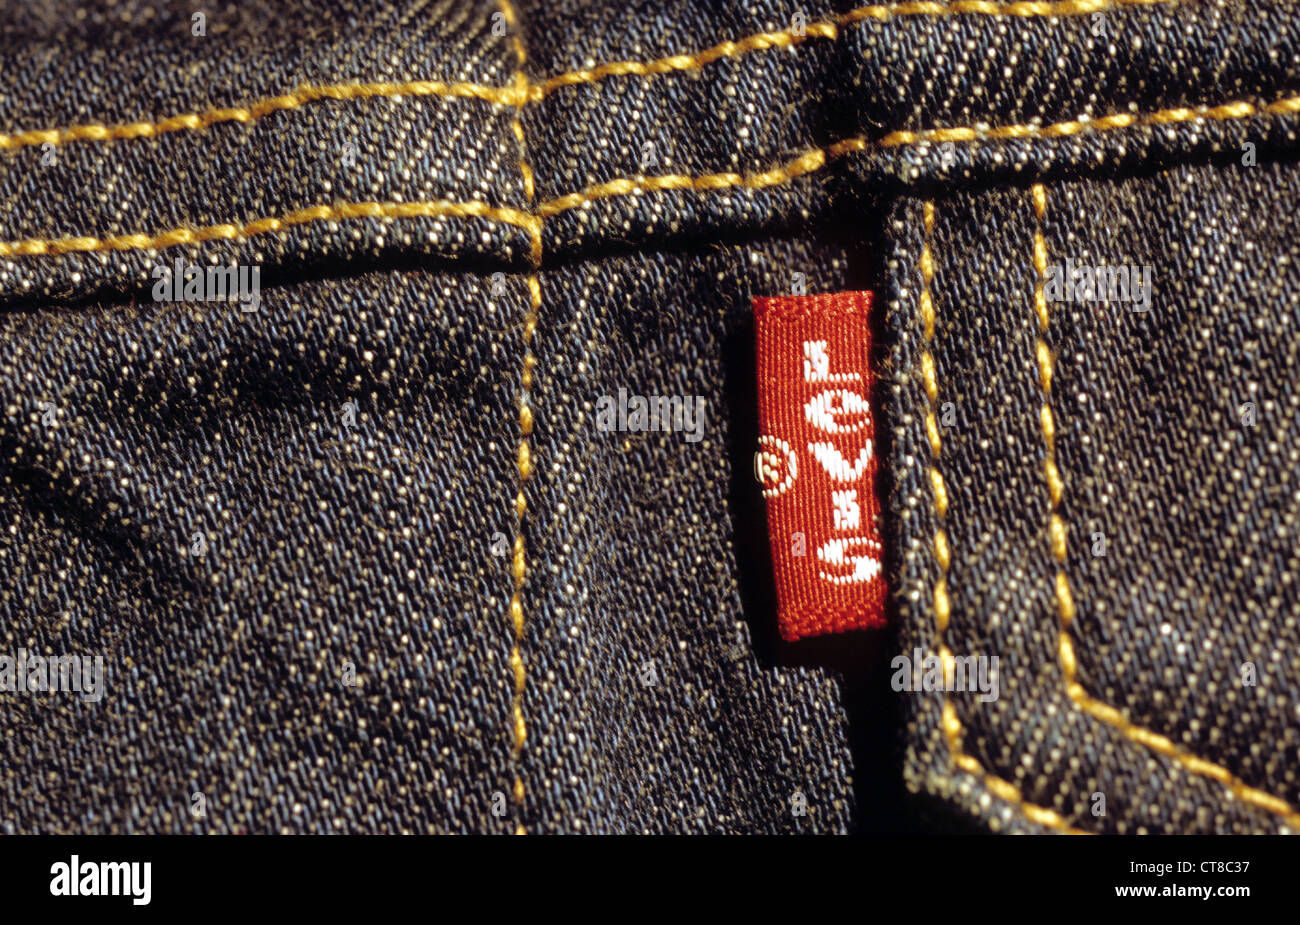 Original Levi's Red Tab-to-brand jeans Stock Photo